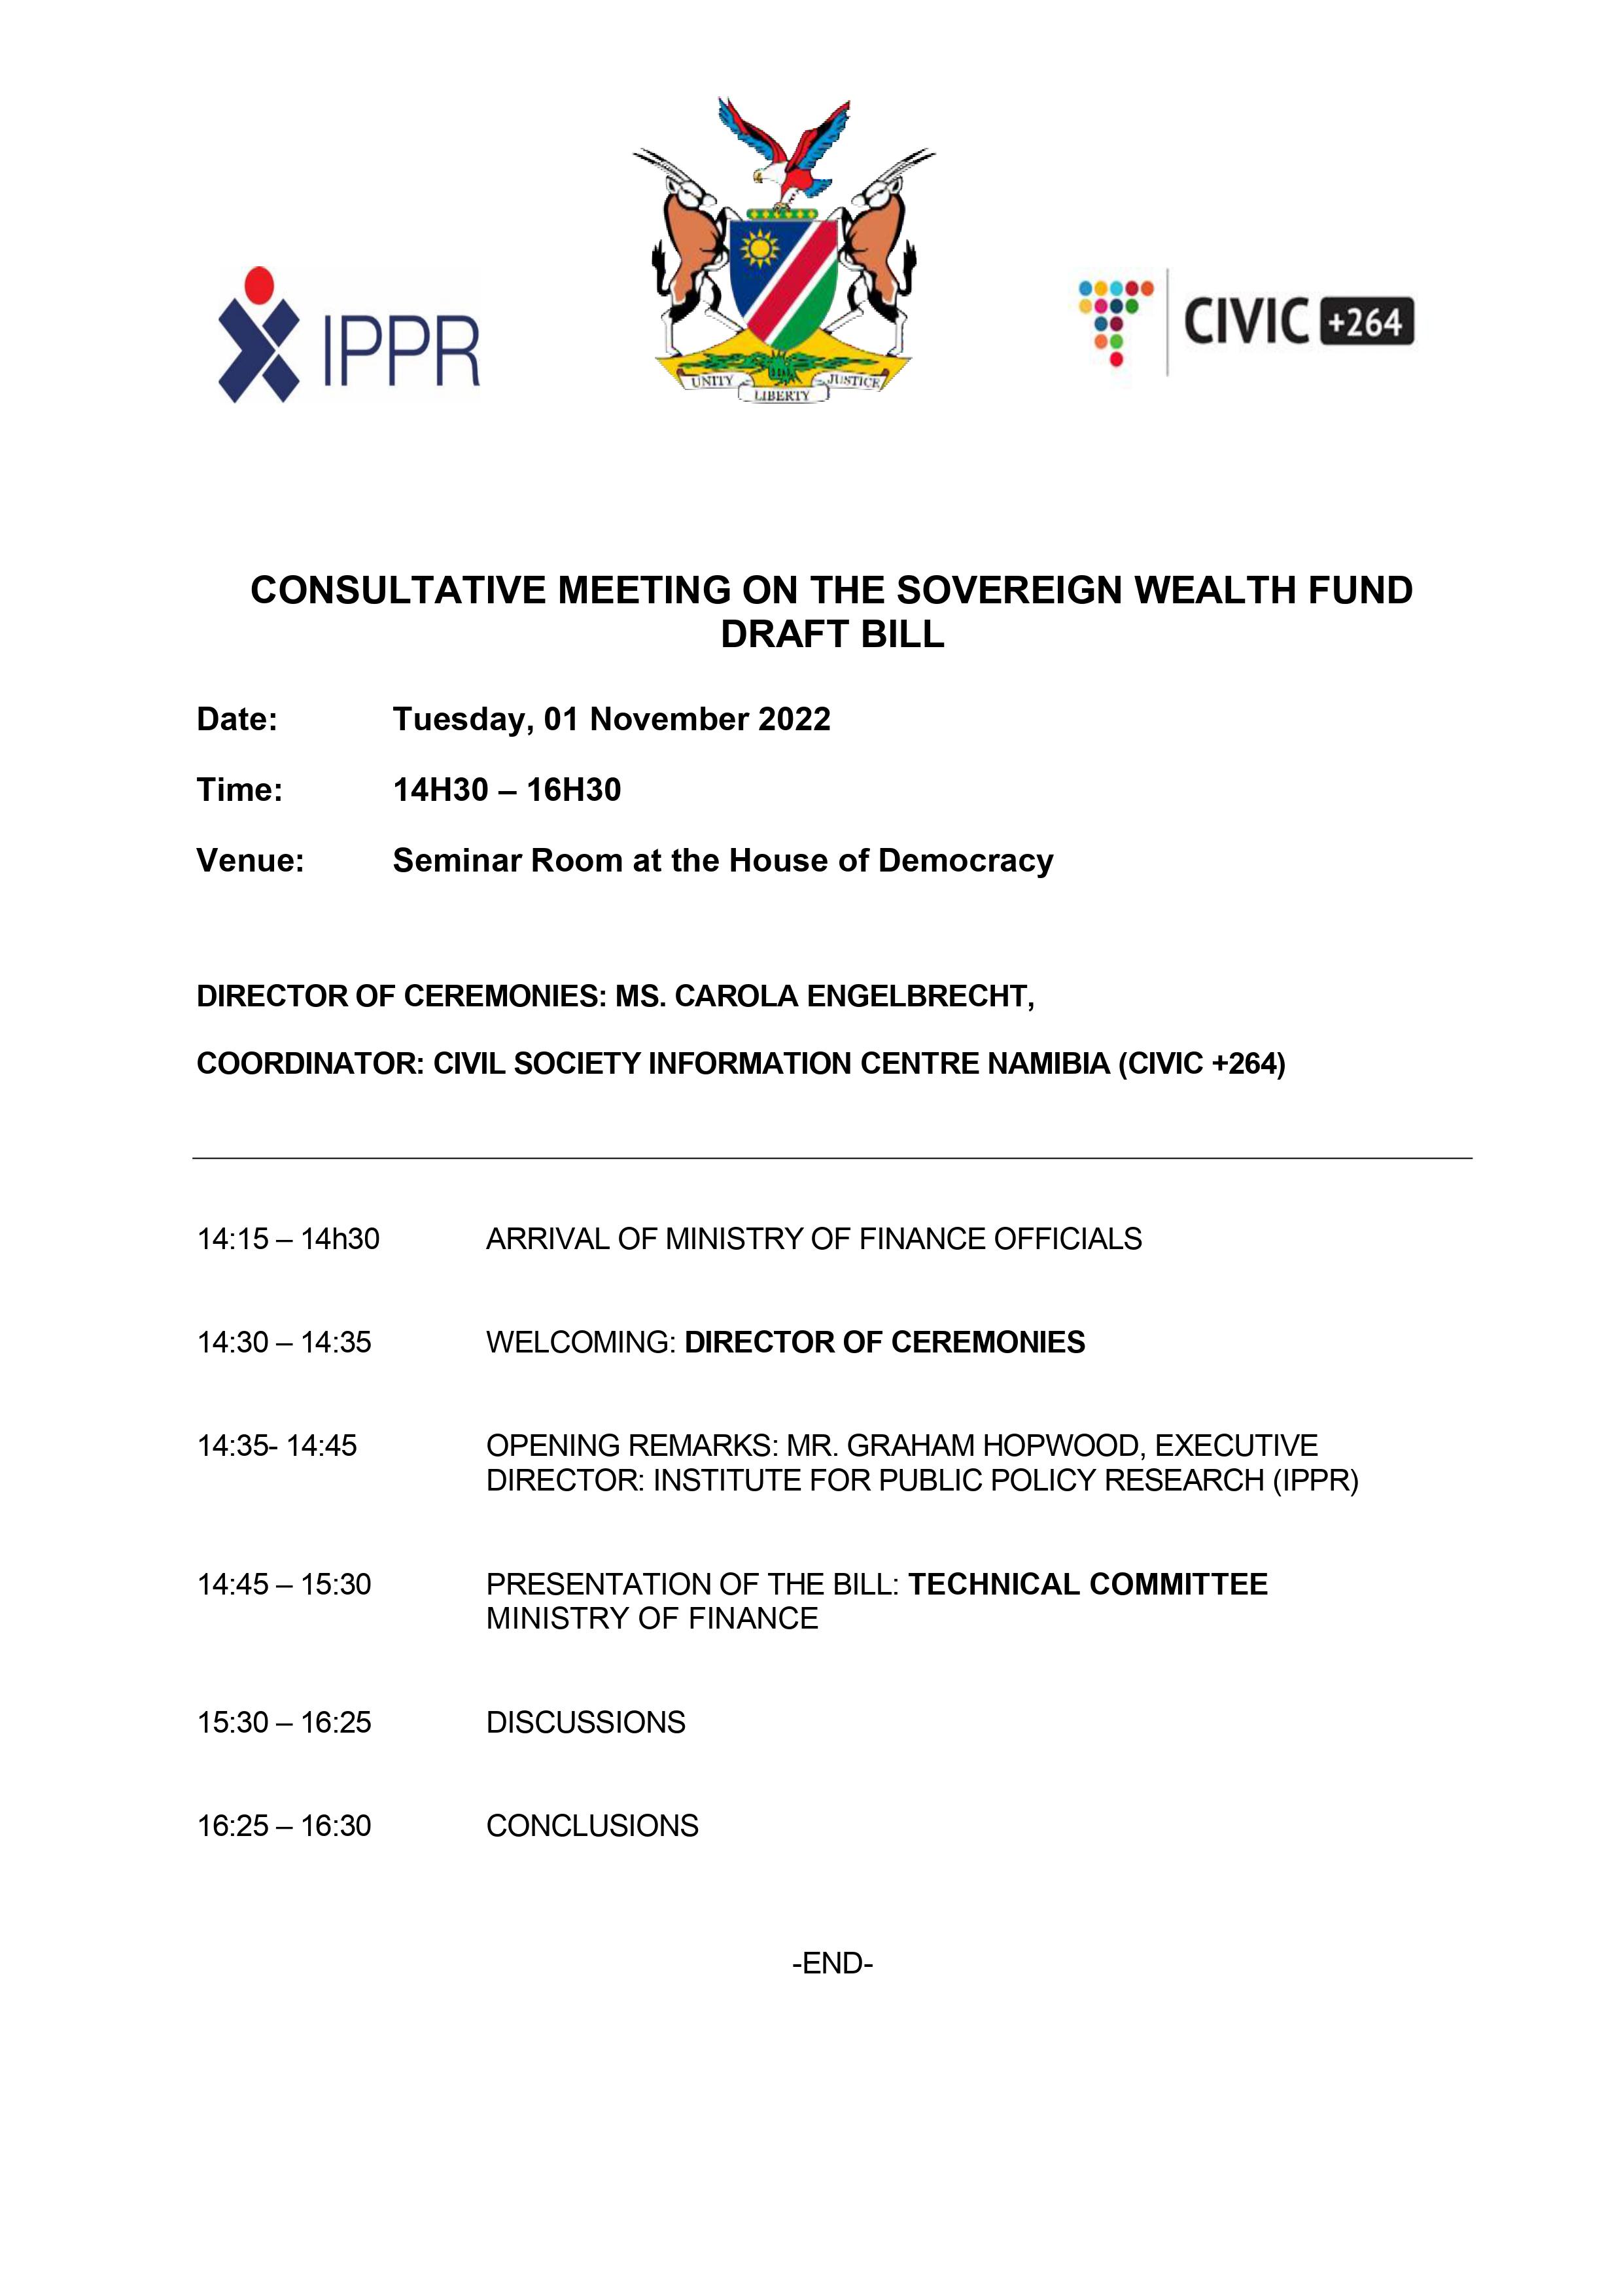 CIVIC 264 Activity 2022 11 01 MoF CSOS Consultative Meeting Draft Sovereign Wealth Fund Bill PROGRAMME final CE